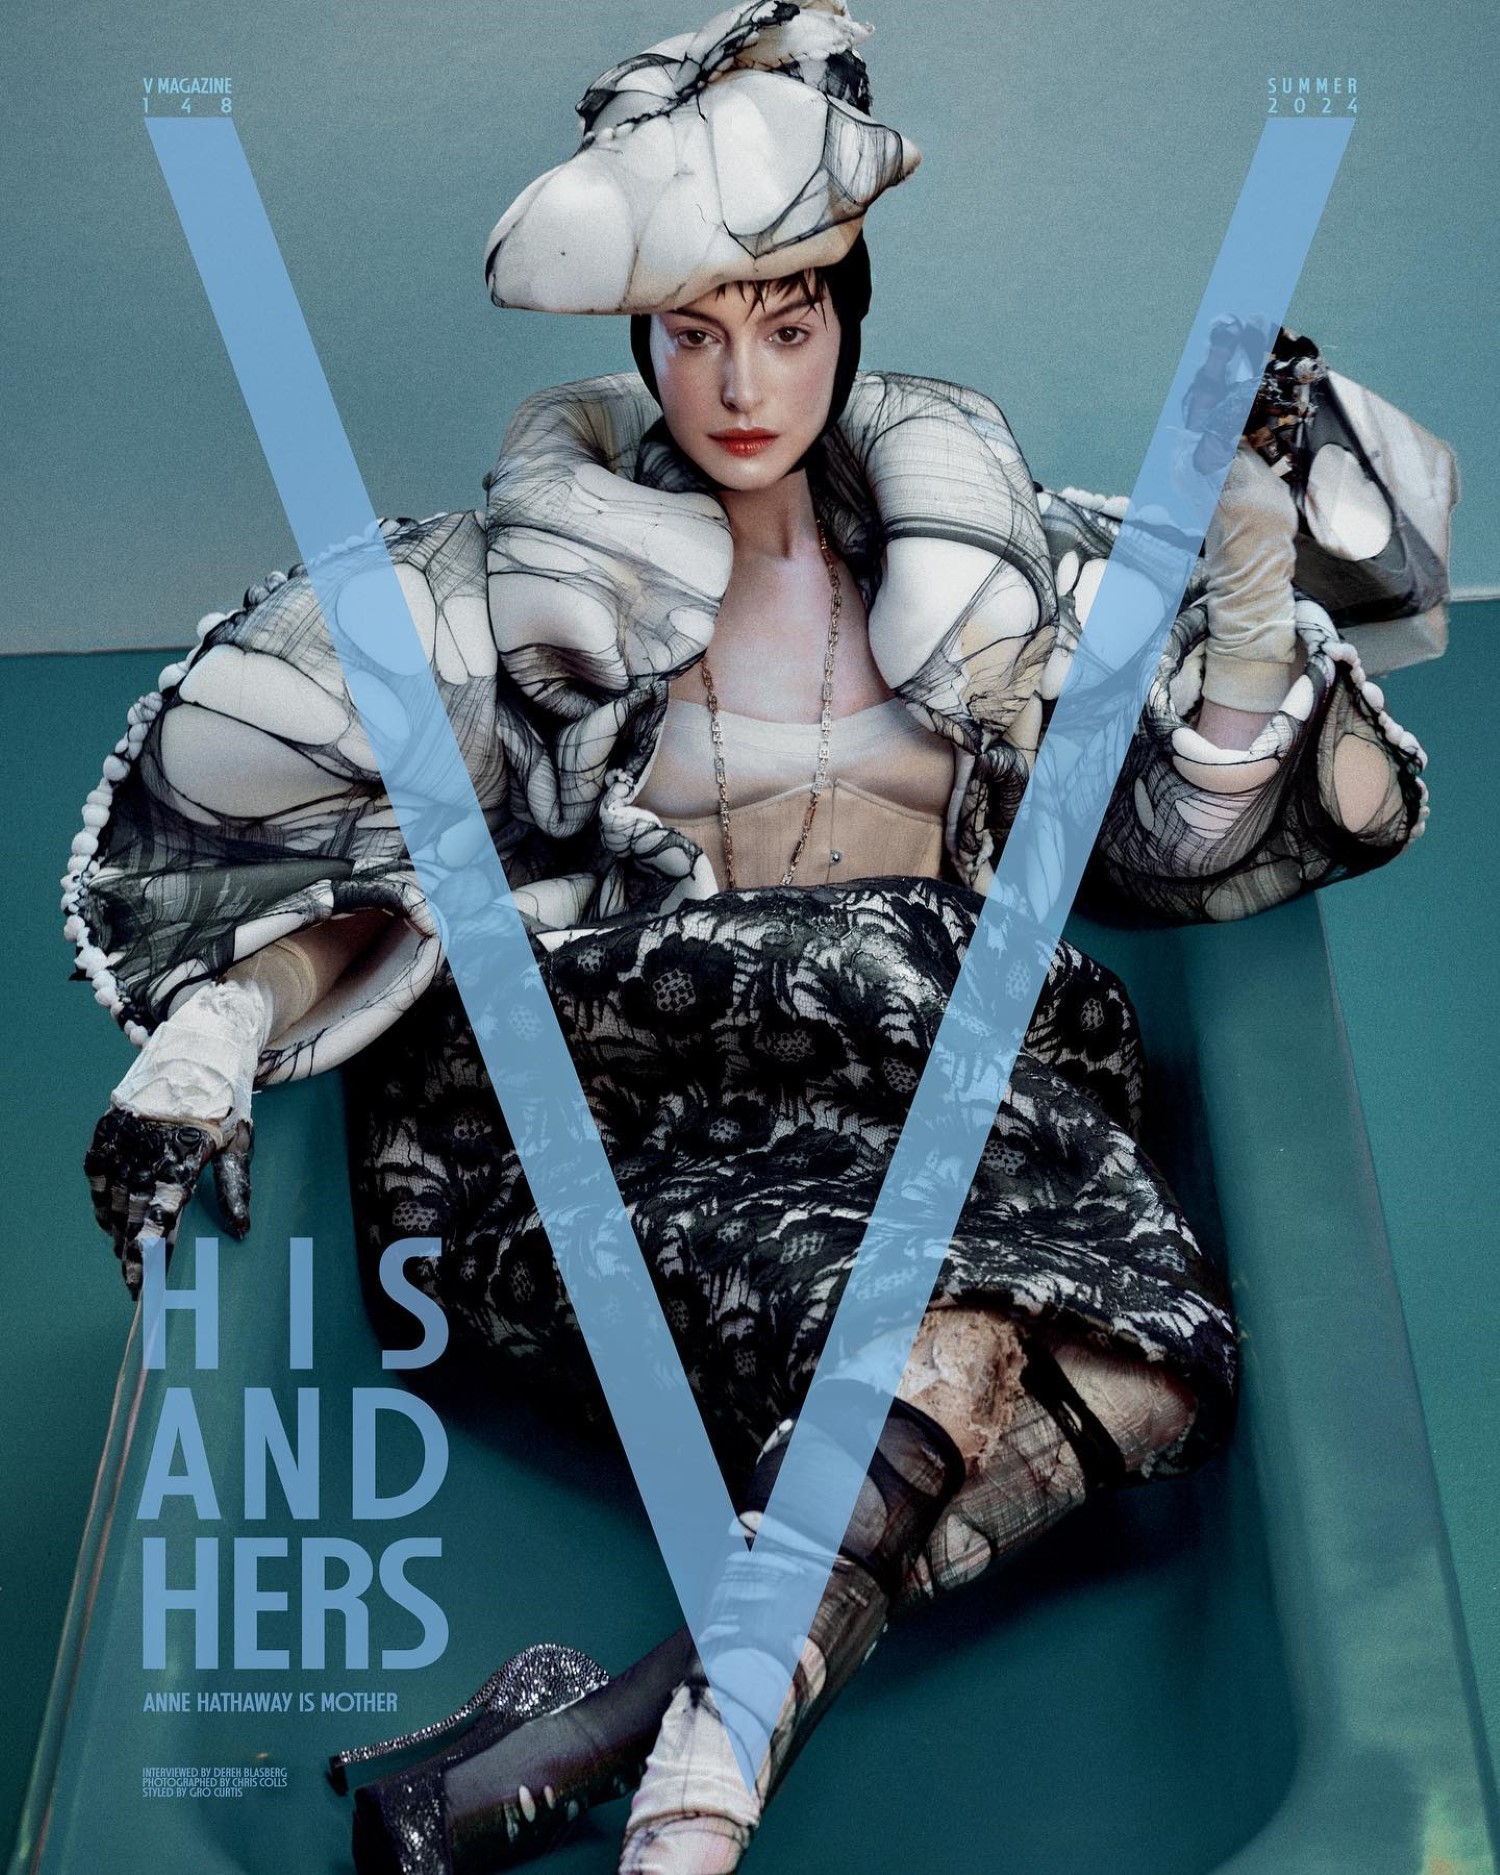 Anne Hathaway covers V Magazine Summer 2024 by Chris Colls